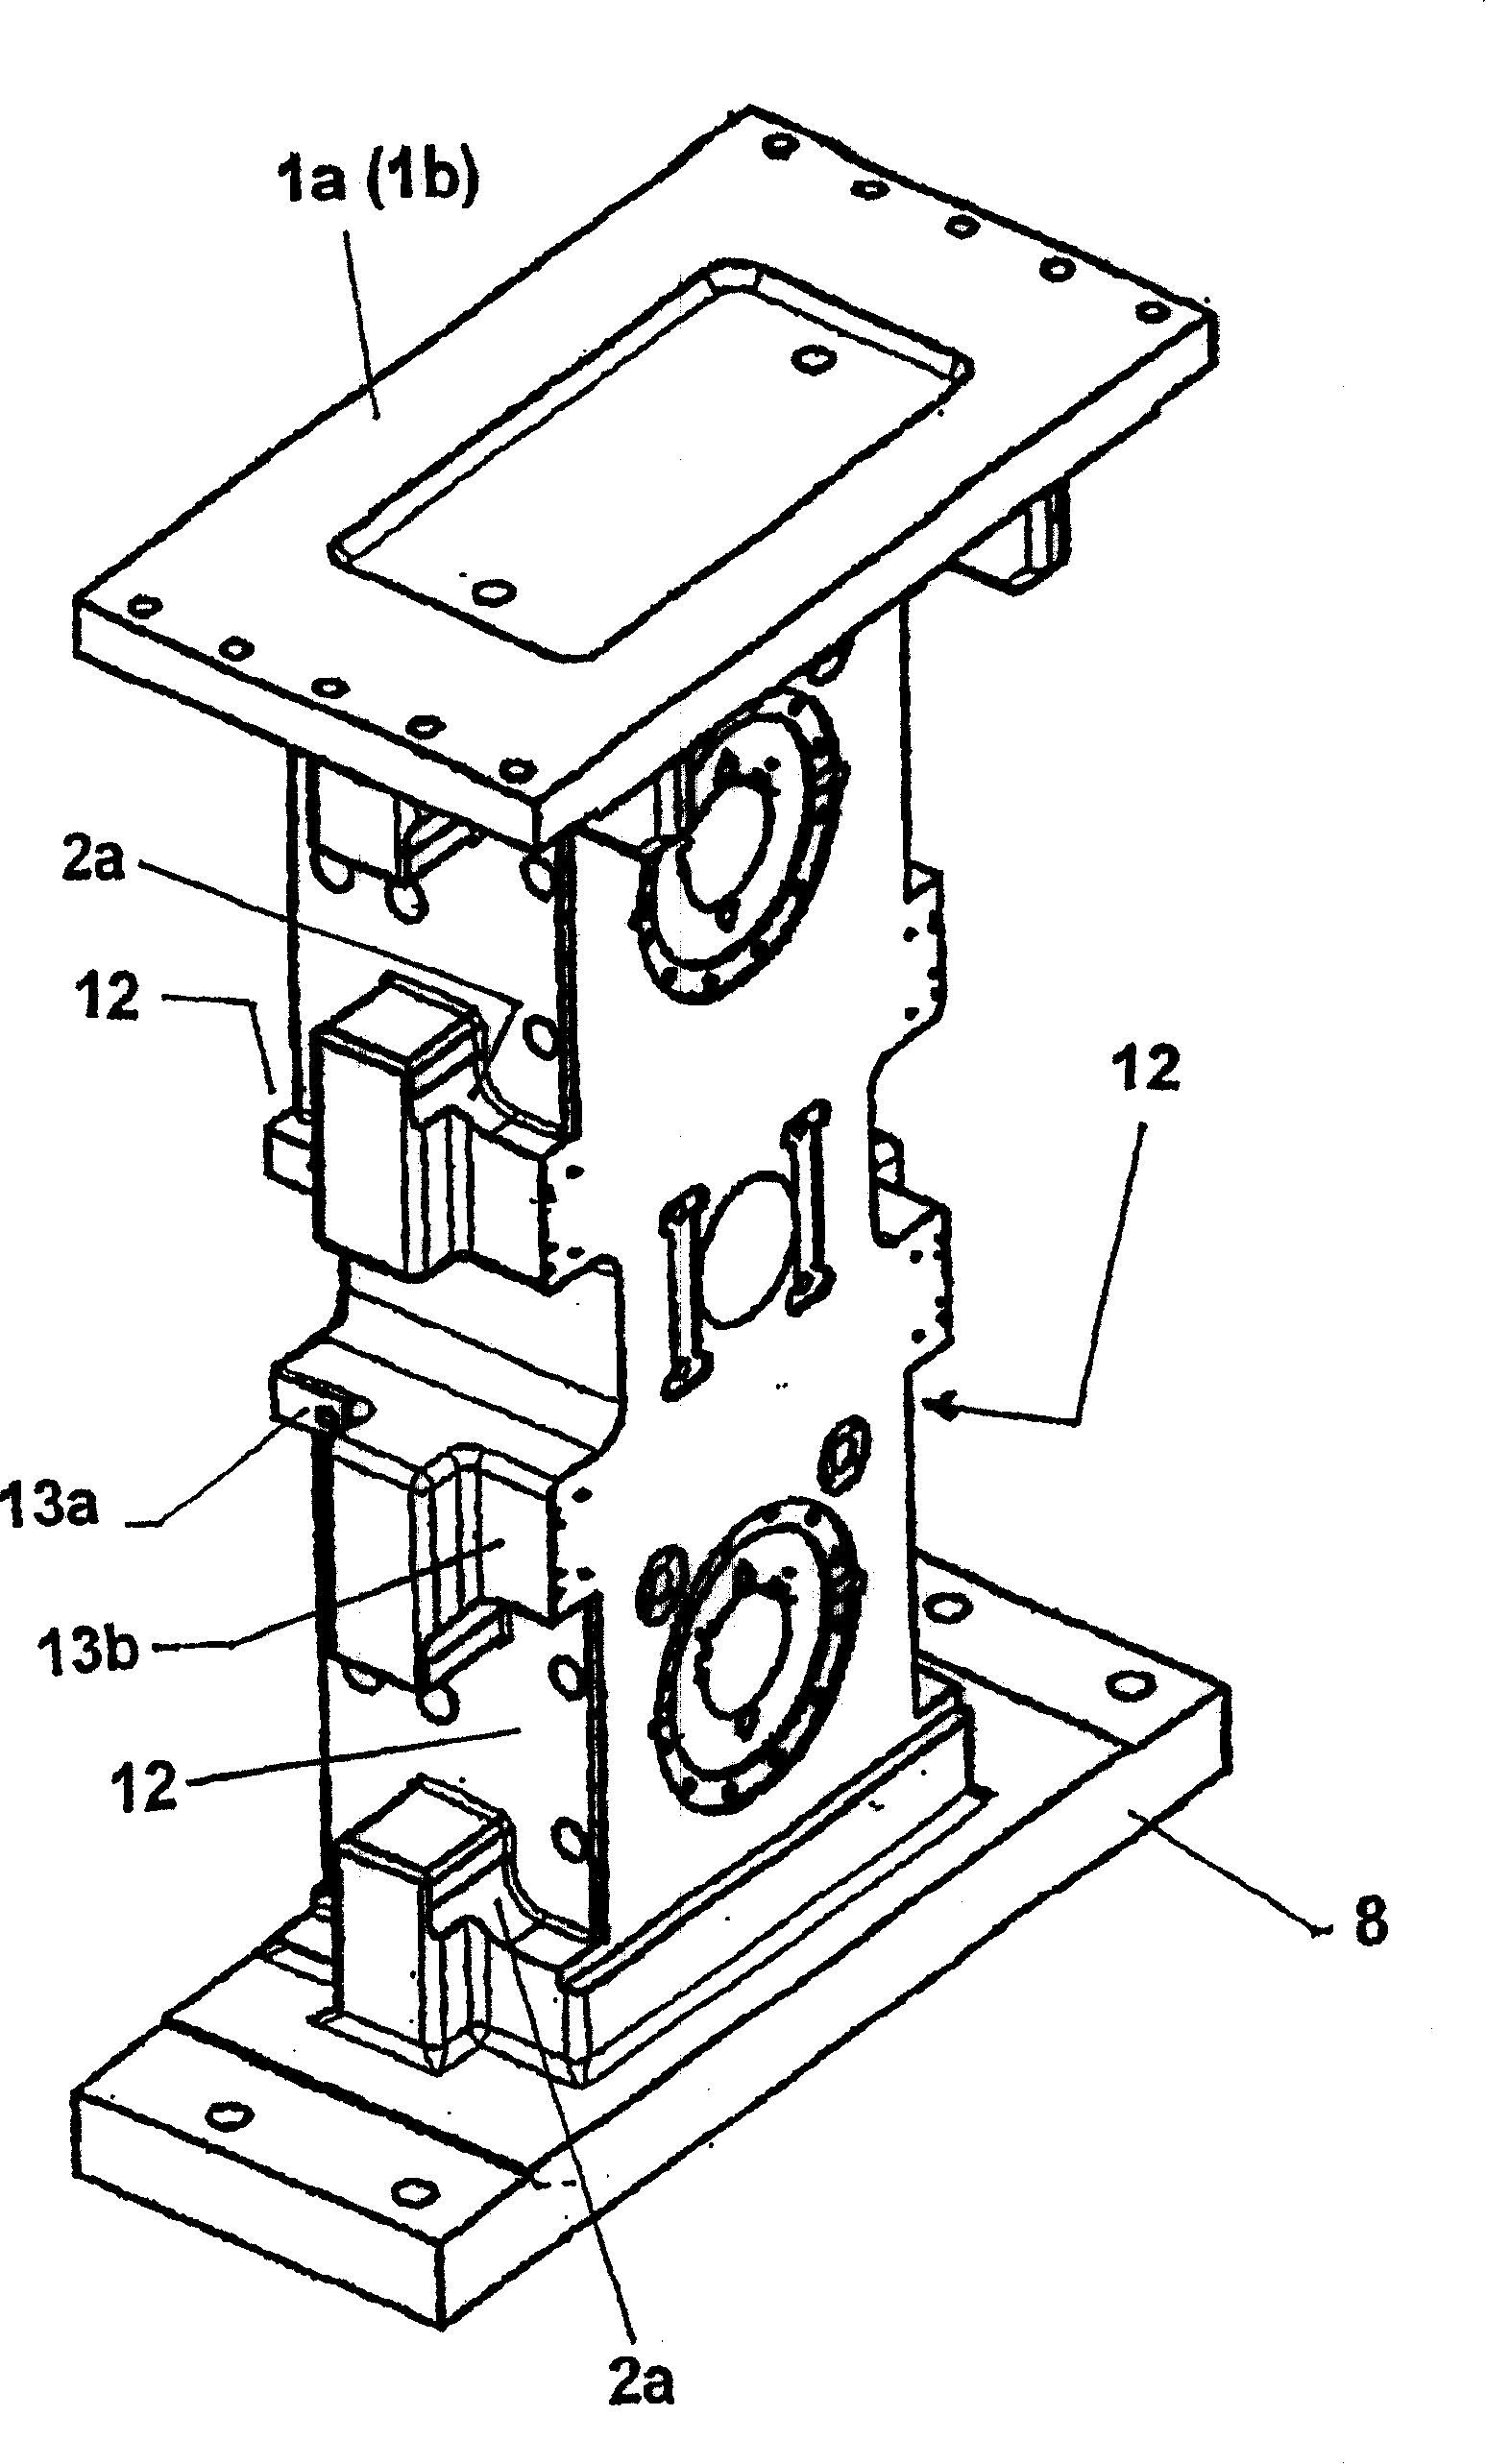 Multi-part roll stand for edgers in rolling mills